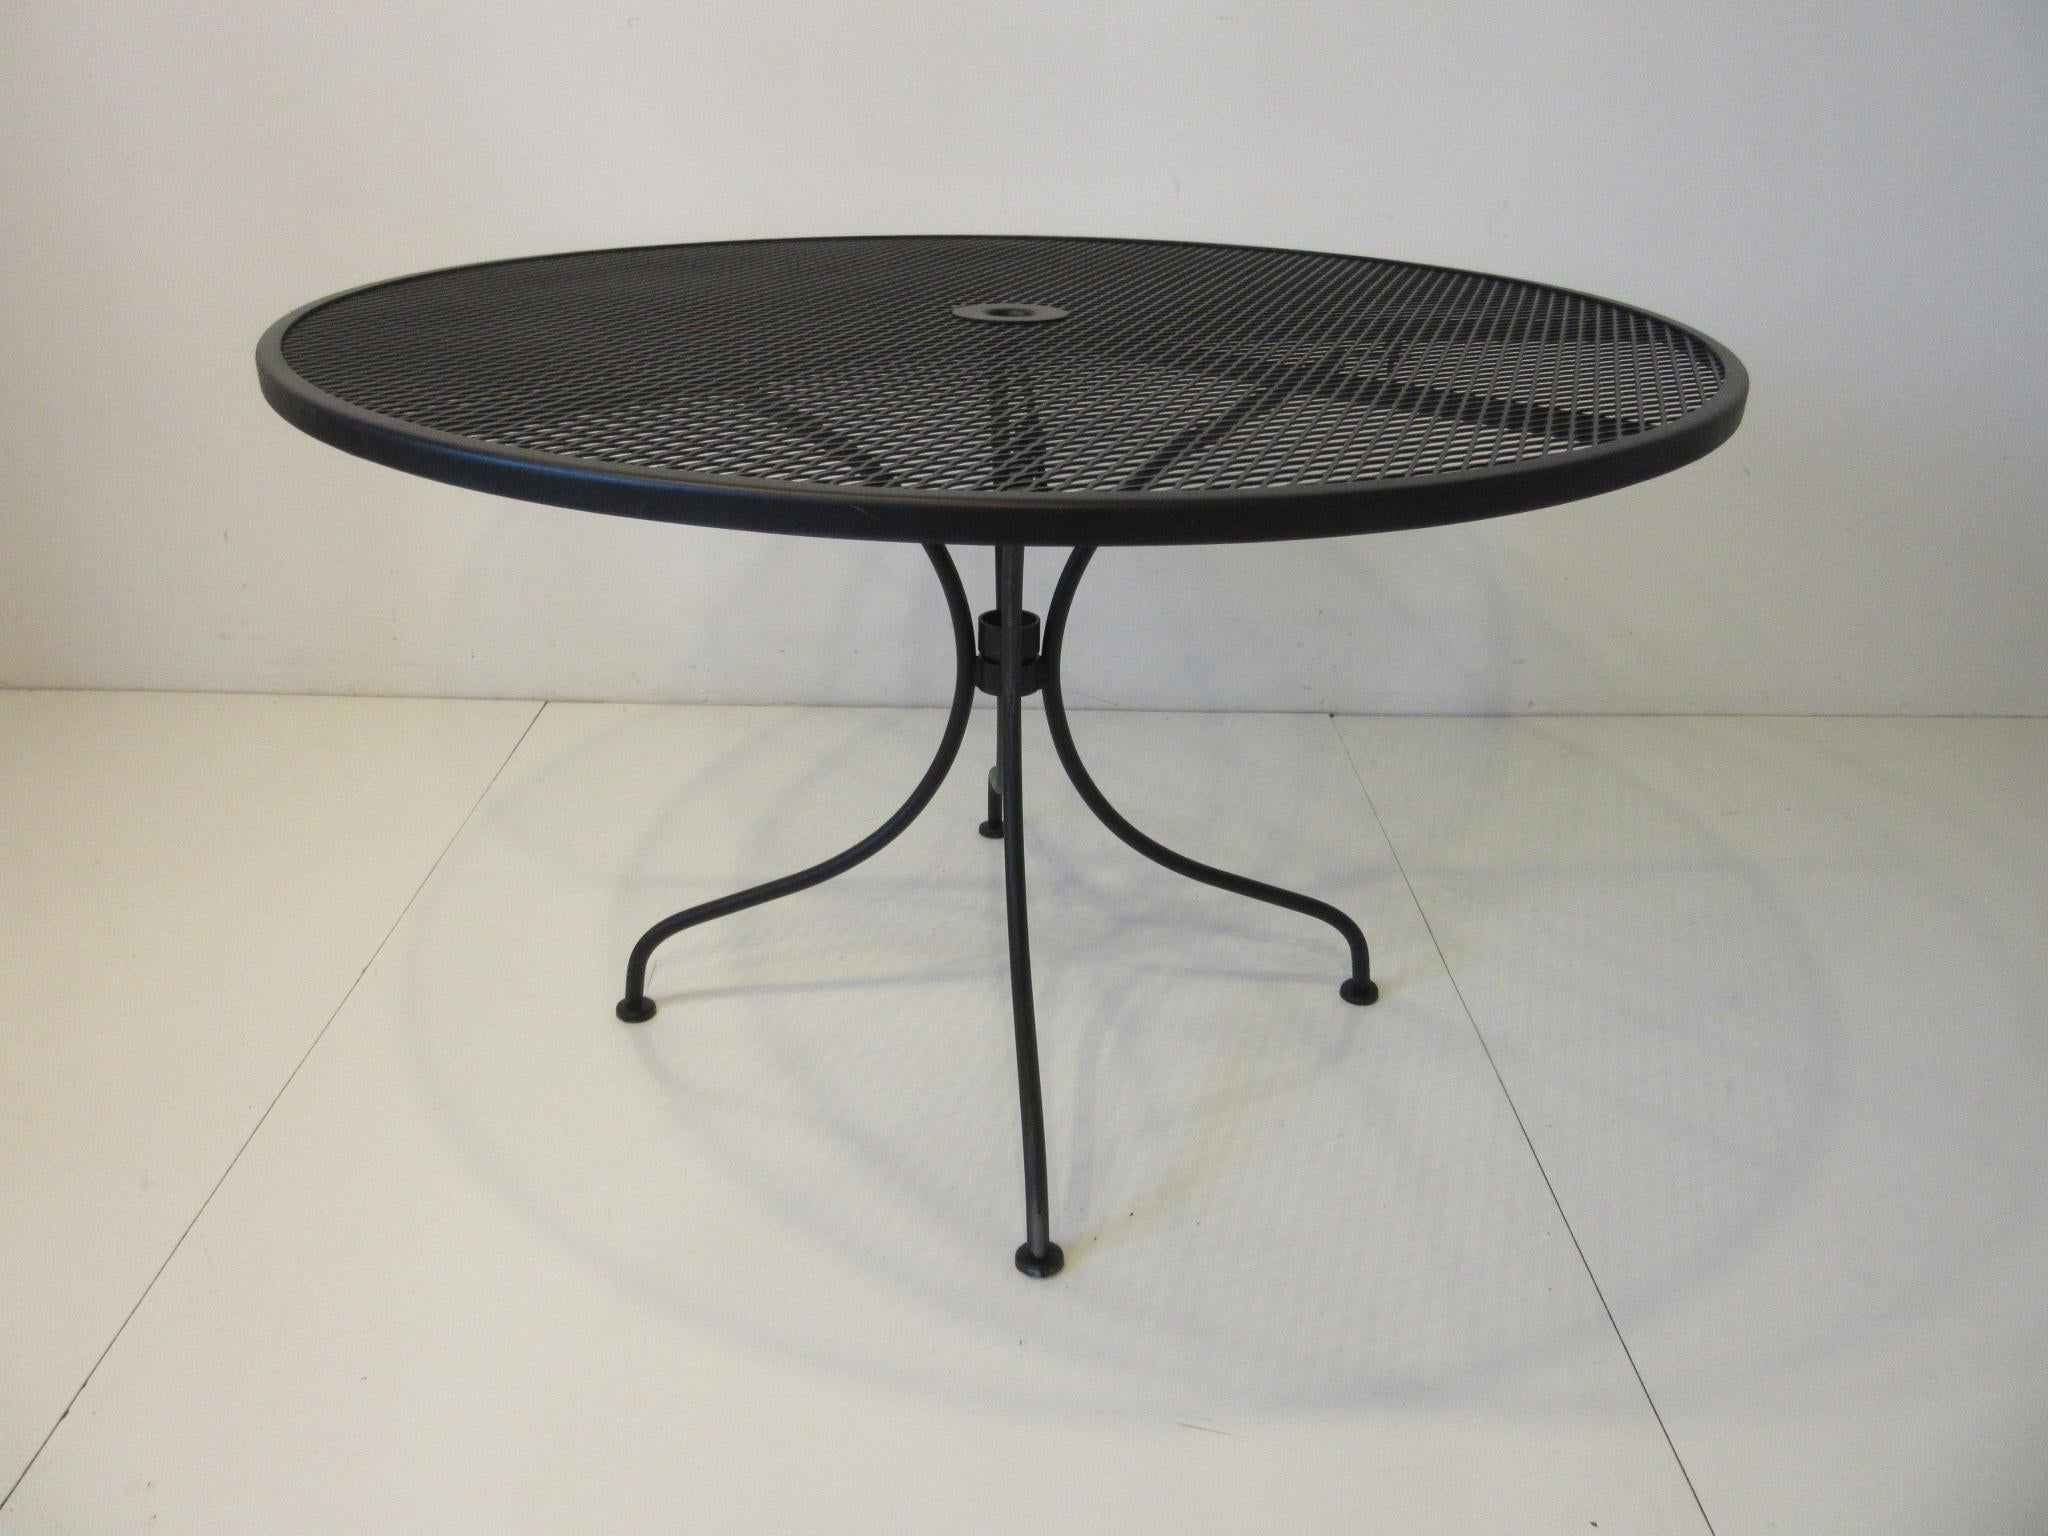 A satin black restored metal mesh dining table with center hole for a large table umbrella, designed by John Woodard. Very well crafted and manufactured by the Woodard Furniture company Owosso Michigan, this table has a two piece base and separate